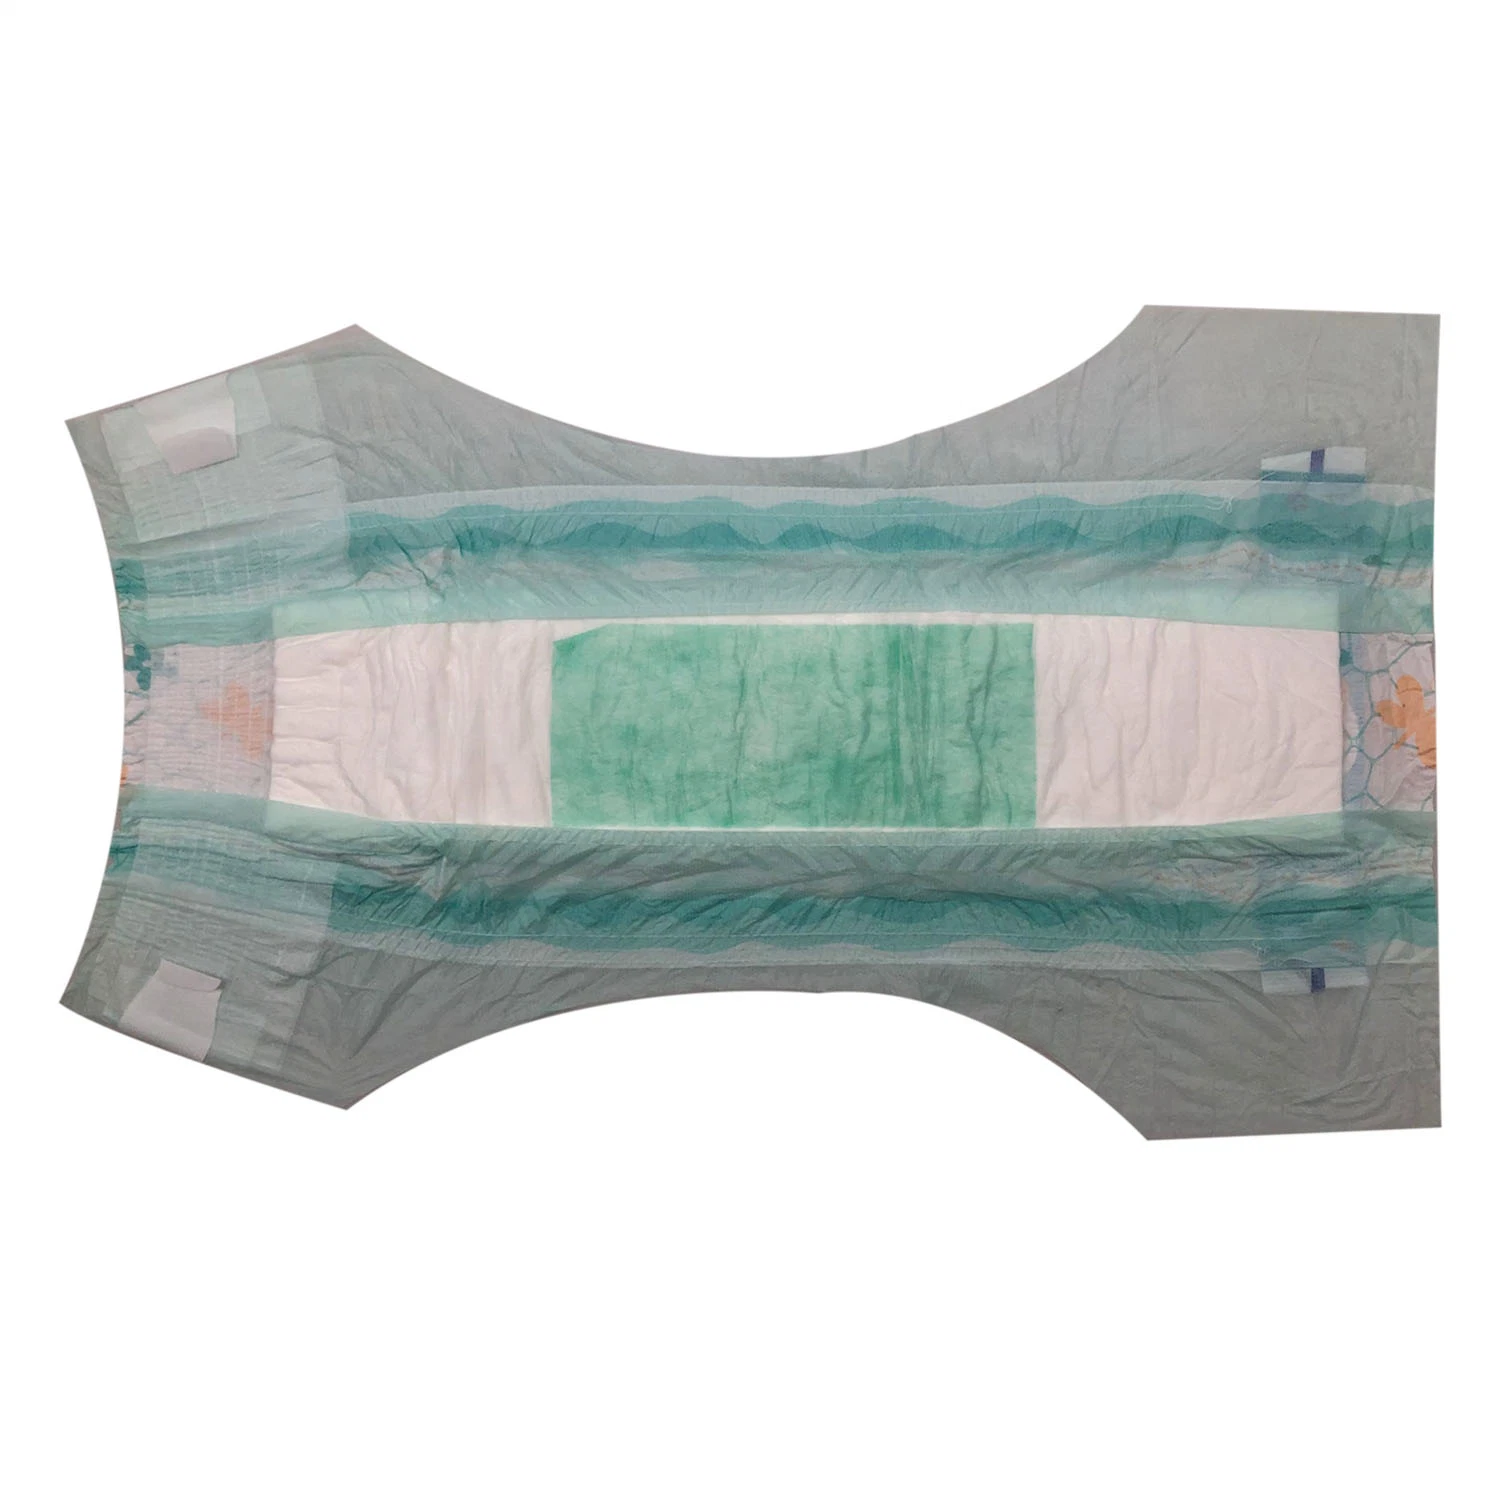 China Products/Suppliers Premium Quality Baby Care Baby Diaper Soft and Breathable High Absorption Baby Diapers